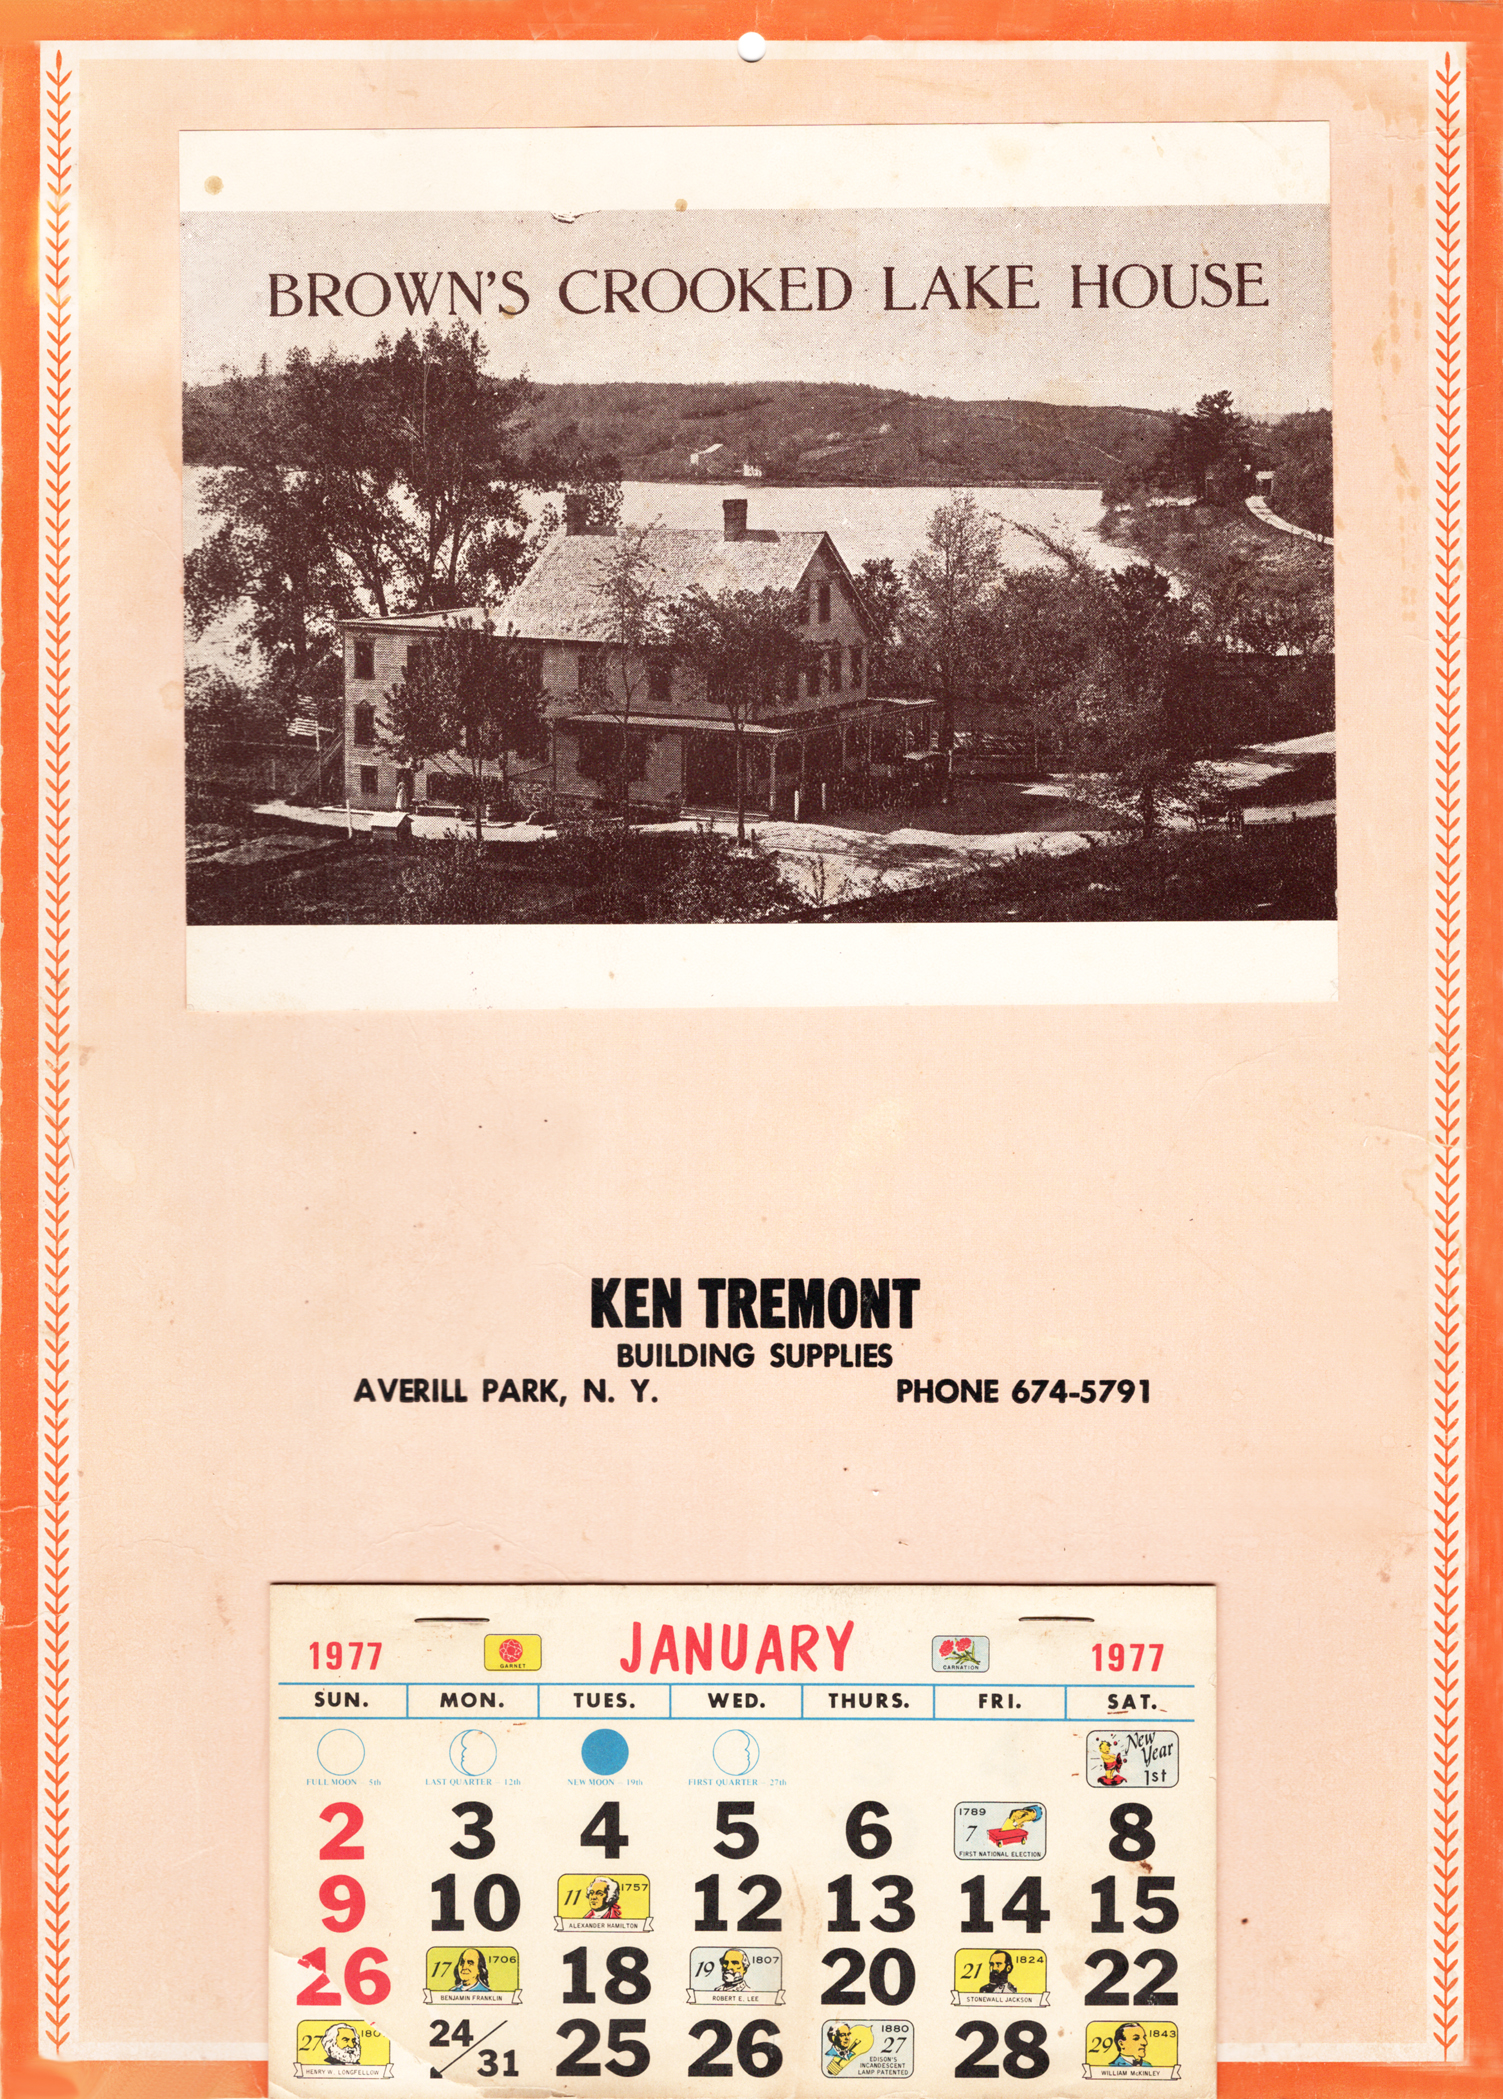 Tremont Lumber Company calendar from 1977.